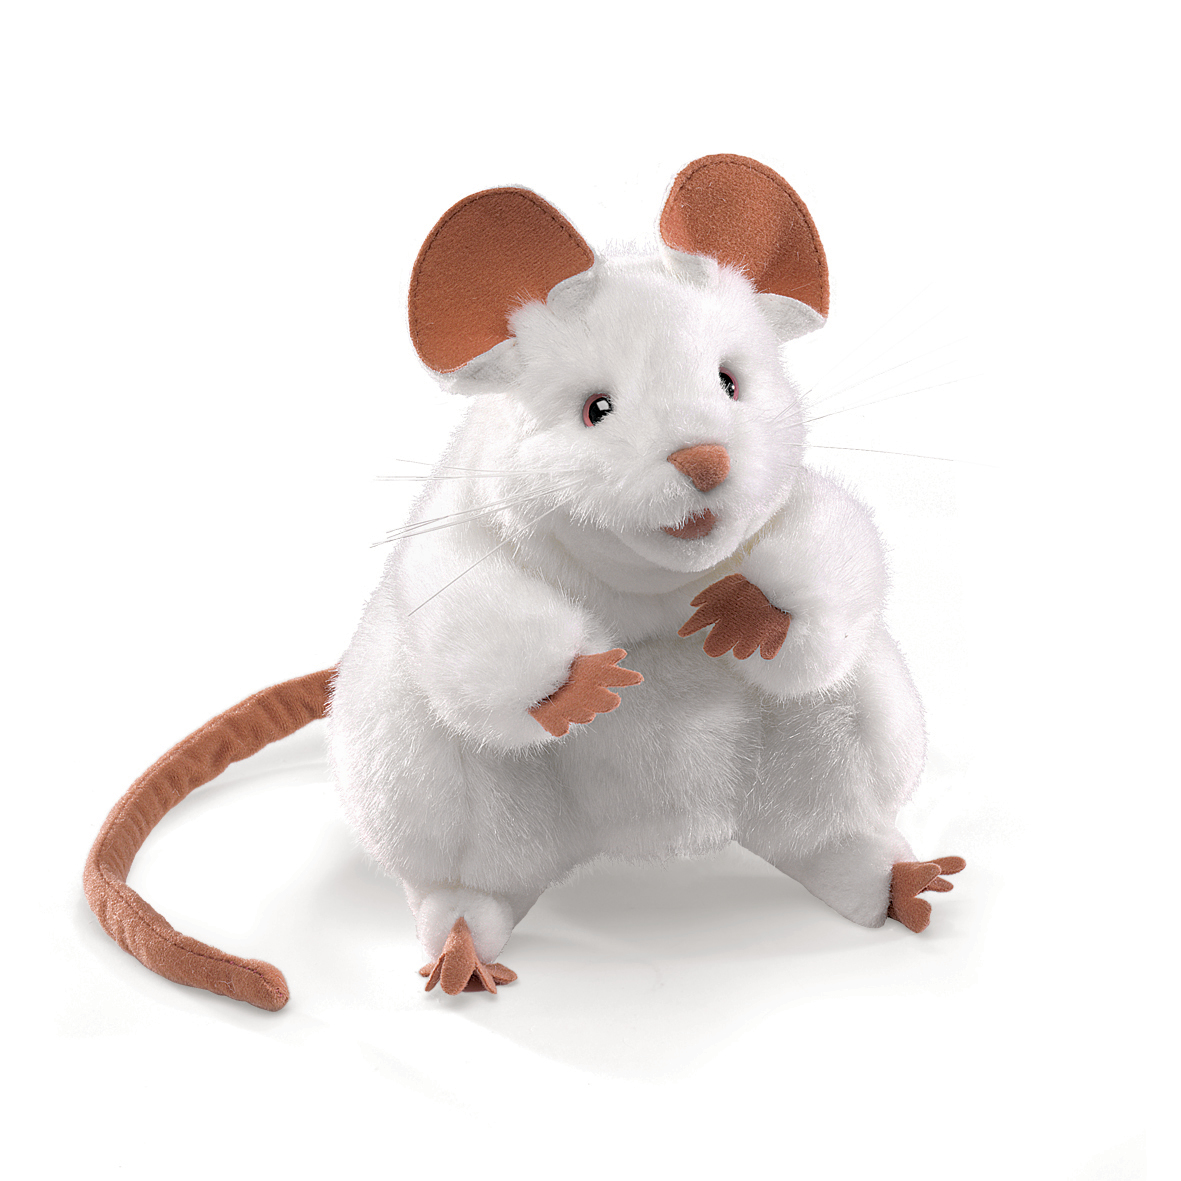 Folkmanis hand puppet white mouse